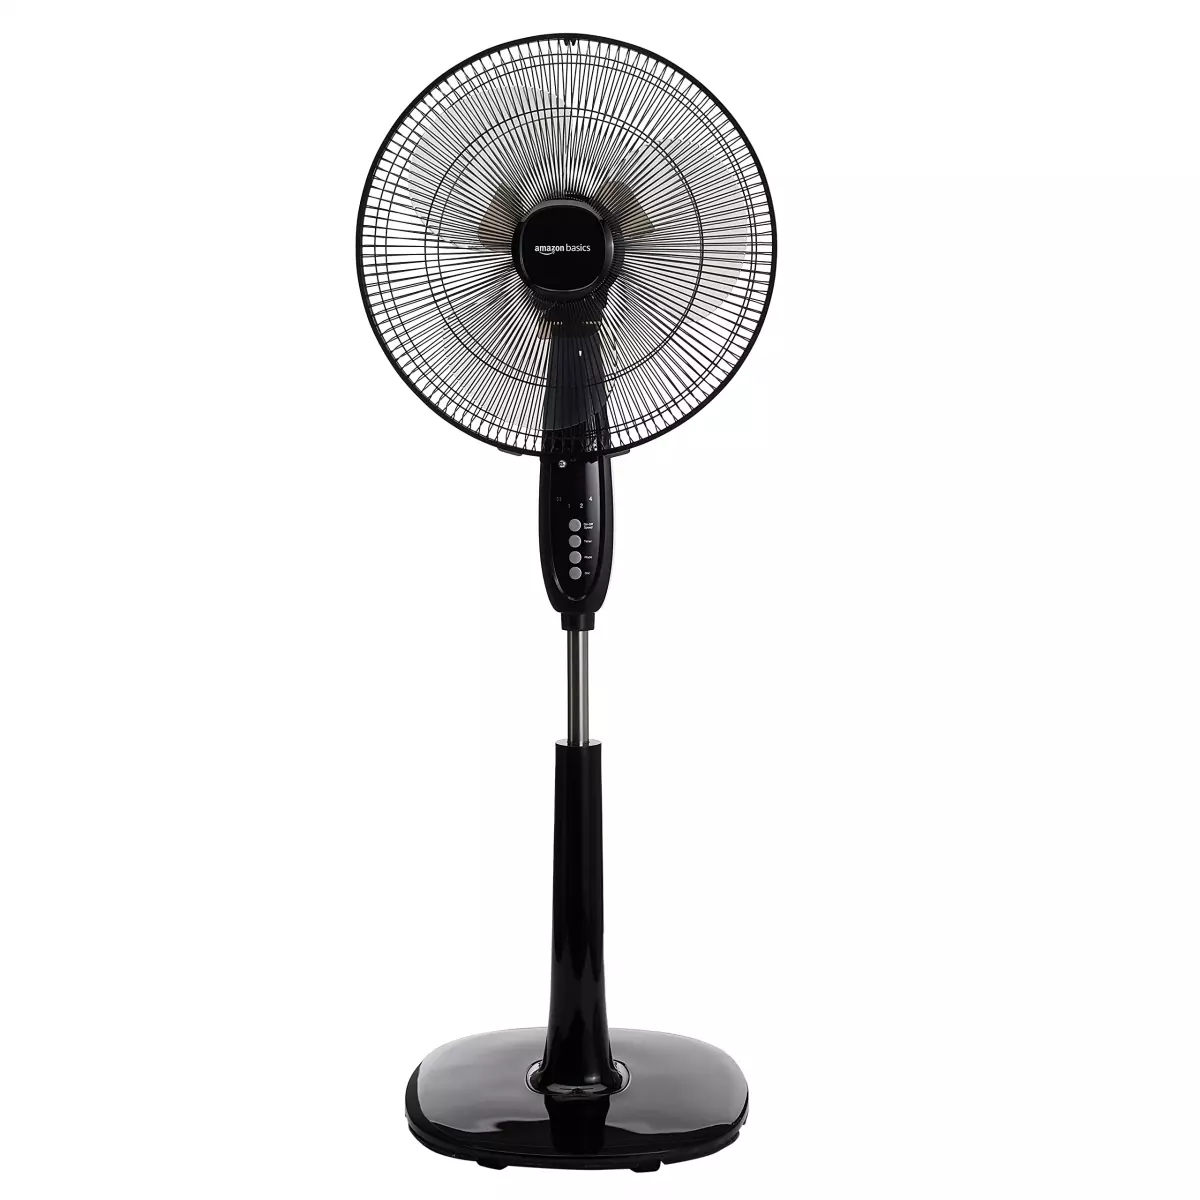 Amazon Basics Oscillating Dual Blade Standing Pedestal Fan with Remote, 16-Inch, Black